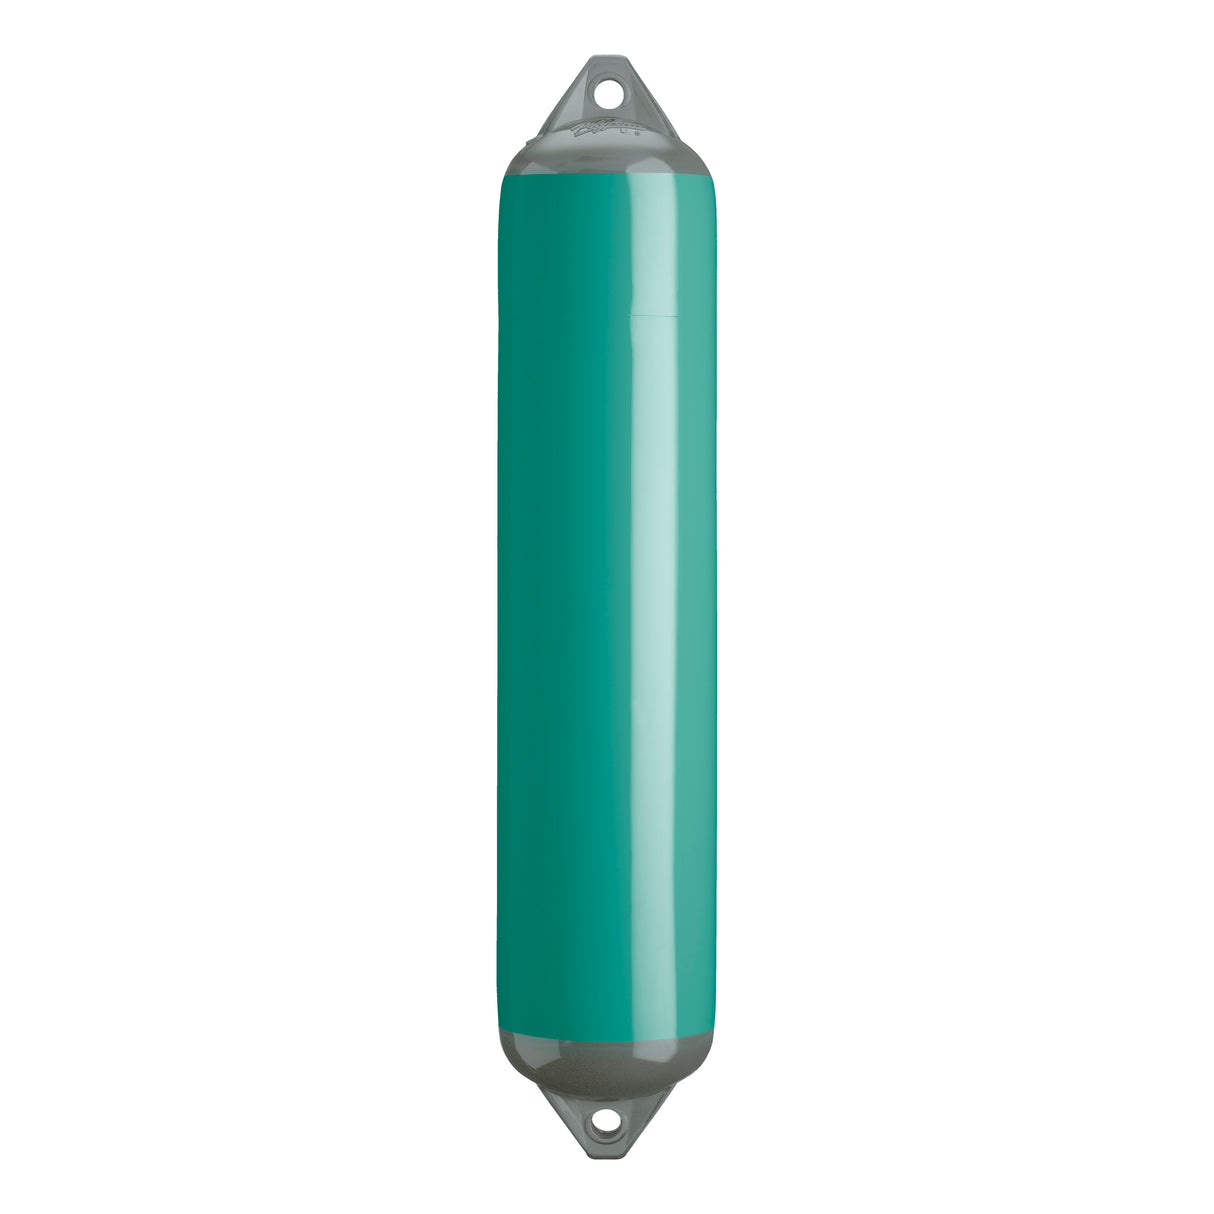 Teal boat fender with Grey-Top, Polyform F-4